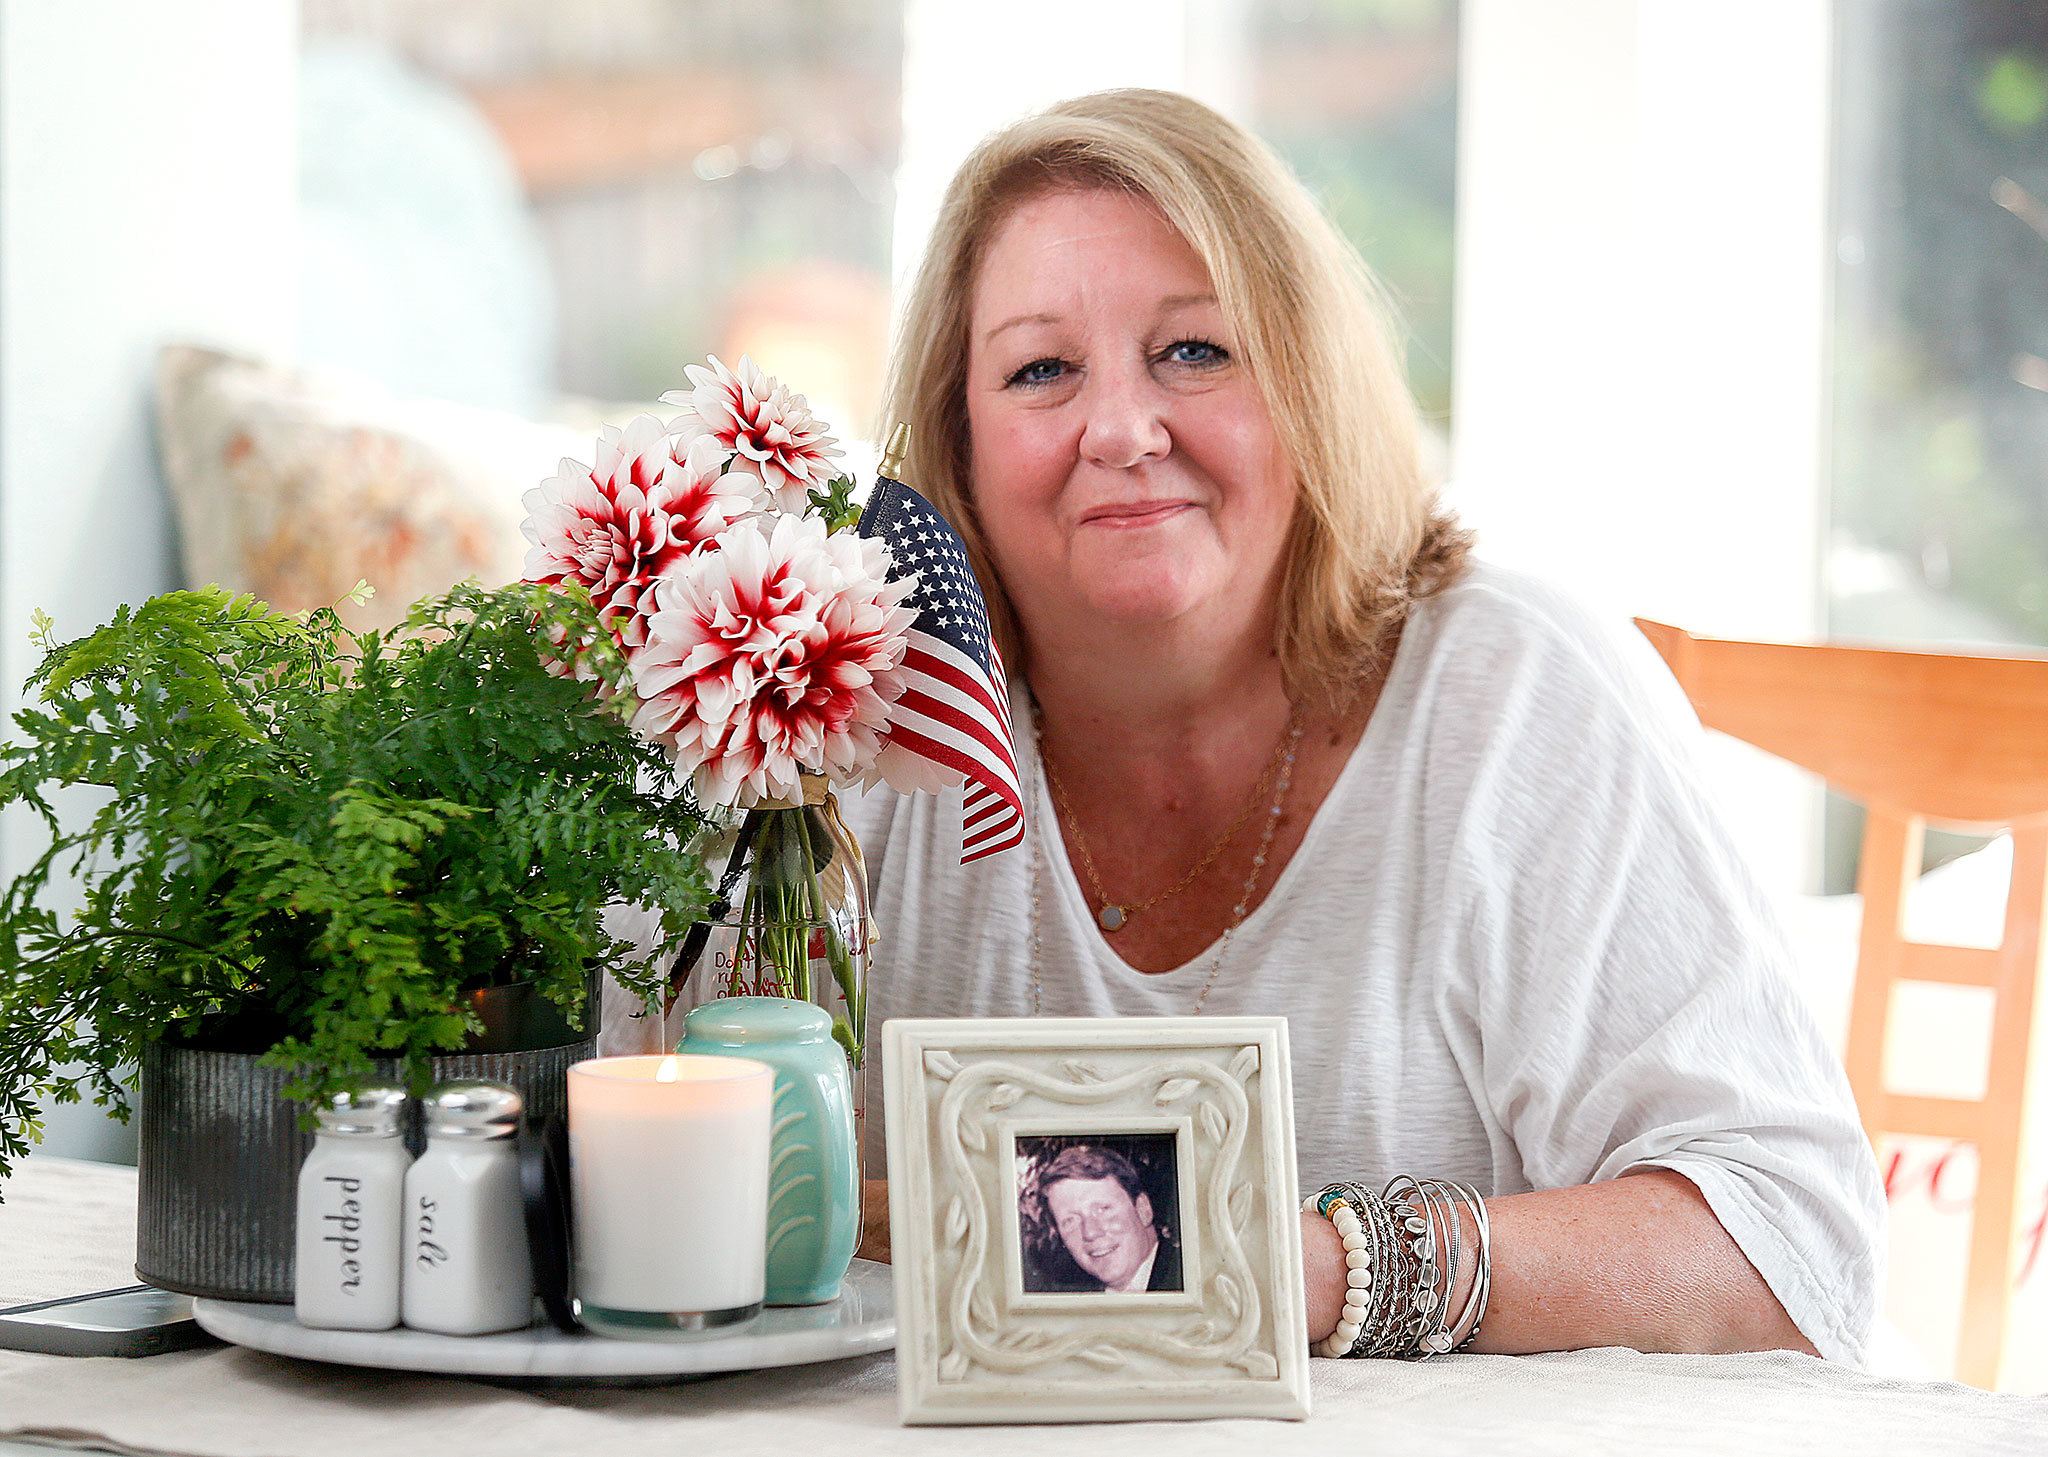 (Dan Bates / The Herald) At Patricia Mackey’s Edmonds home, flags, large and small, have been on display every day since 9/11. A photo of her cousin, Dennis Buckley, who died in the North Tower, sits on the kitchen table. He was 38 and had a wife and three daughters. Mackey, a registered 9/11 family member, doesn’t want people to ever forget. She has been to the site and read the names of victims. (Dan Bates / The Herald)